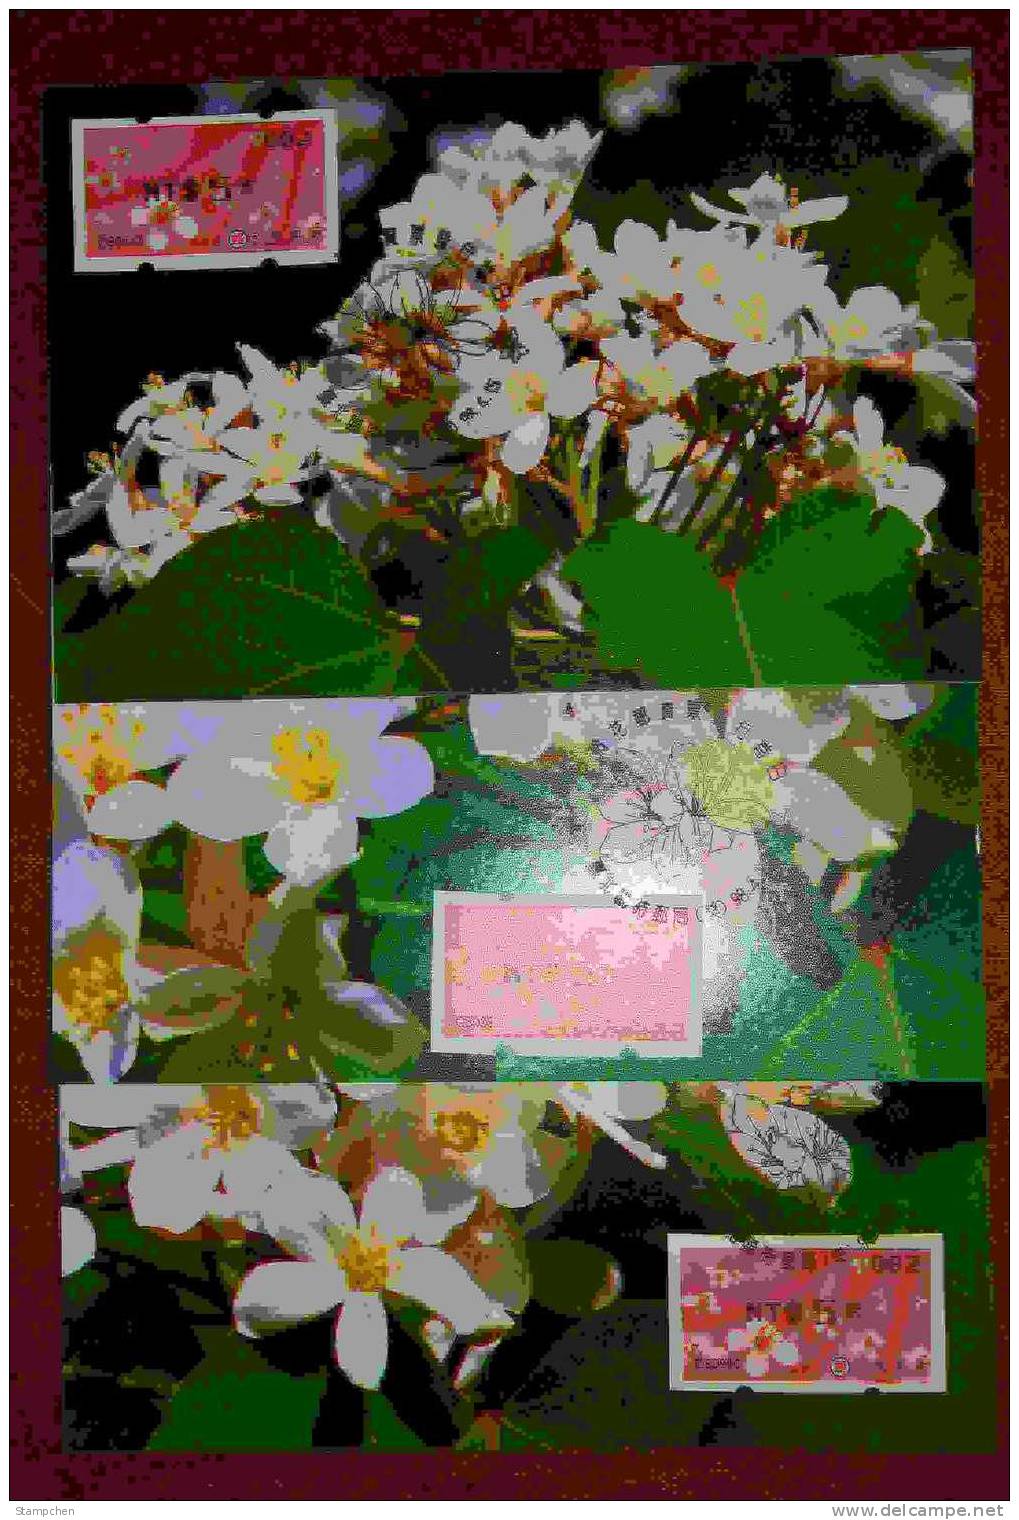 3 Maxi Cards Taiwan 2009 ATM Frama Stamp- 2nd Blossoms Of Tung Tree - Black Imprint - Flower (B) - Cartes-maximum